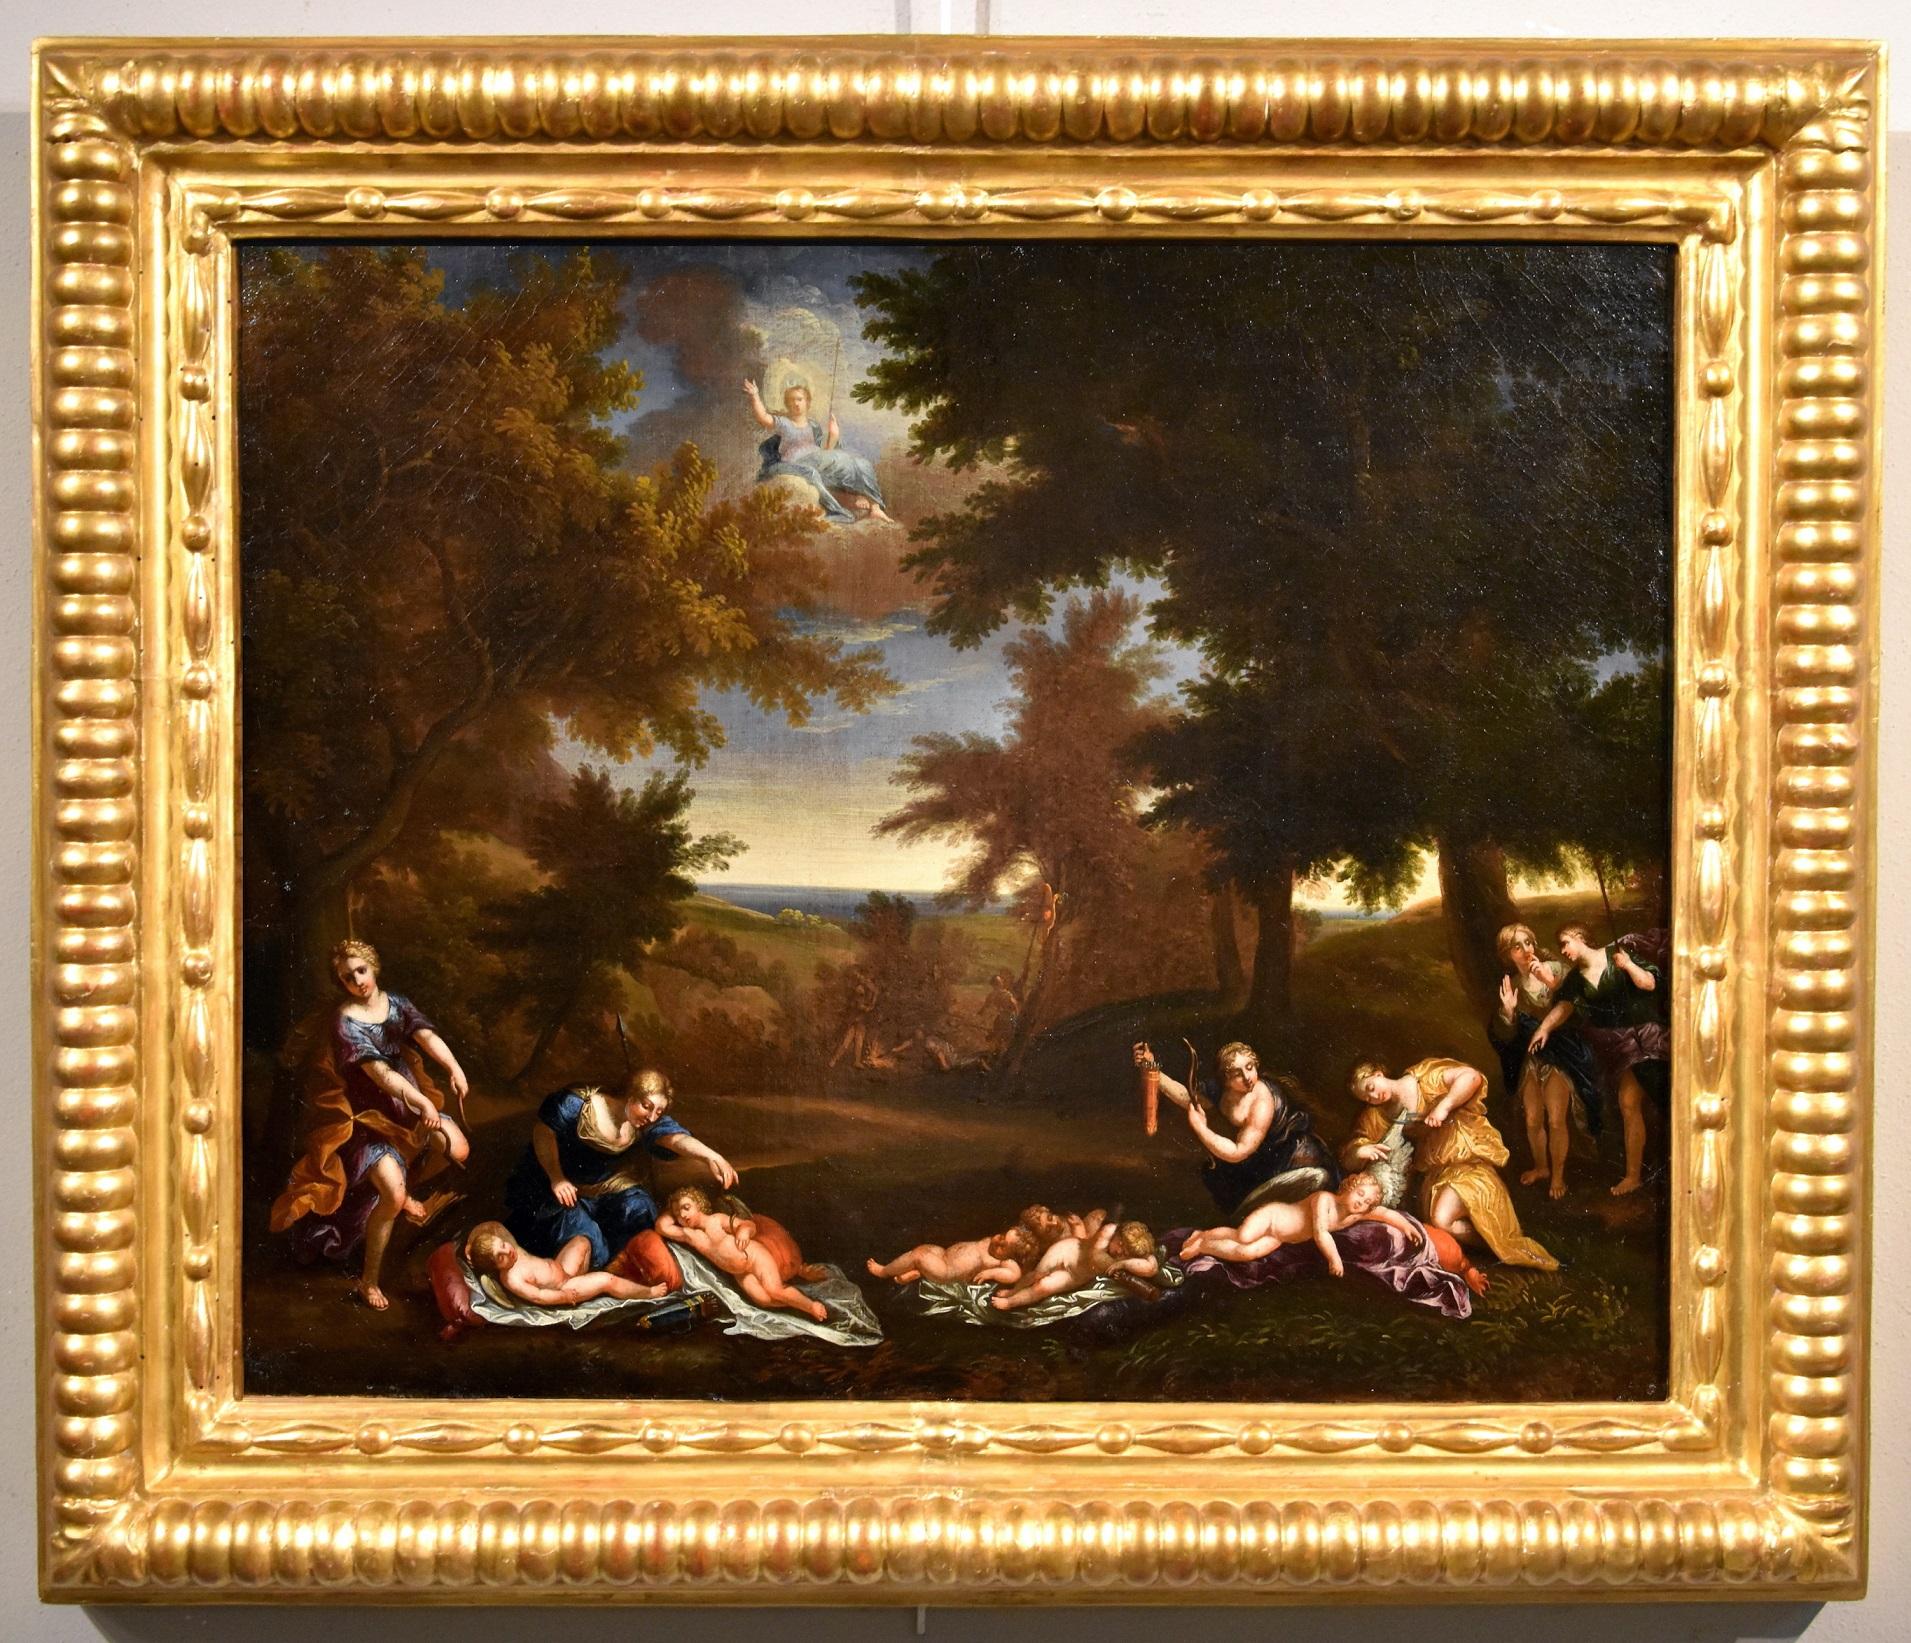 Francesco Albani (Bologna 1578 - 1660) Landscape Painting - Nymphs Albani Paint Oil on canvas 17th Century Old master Italy Landscape Italy